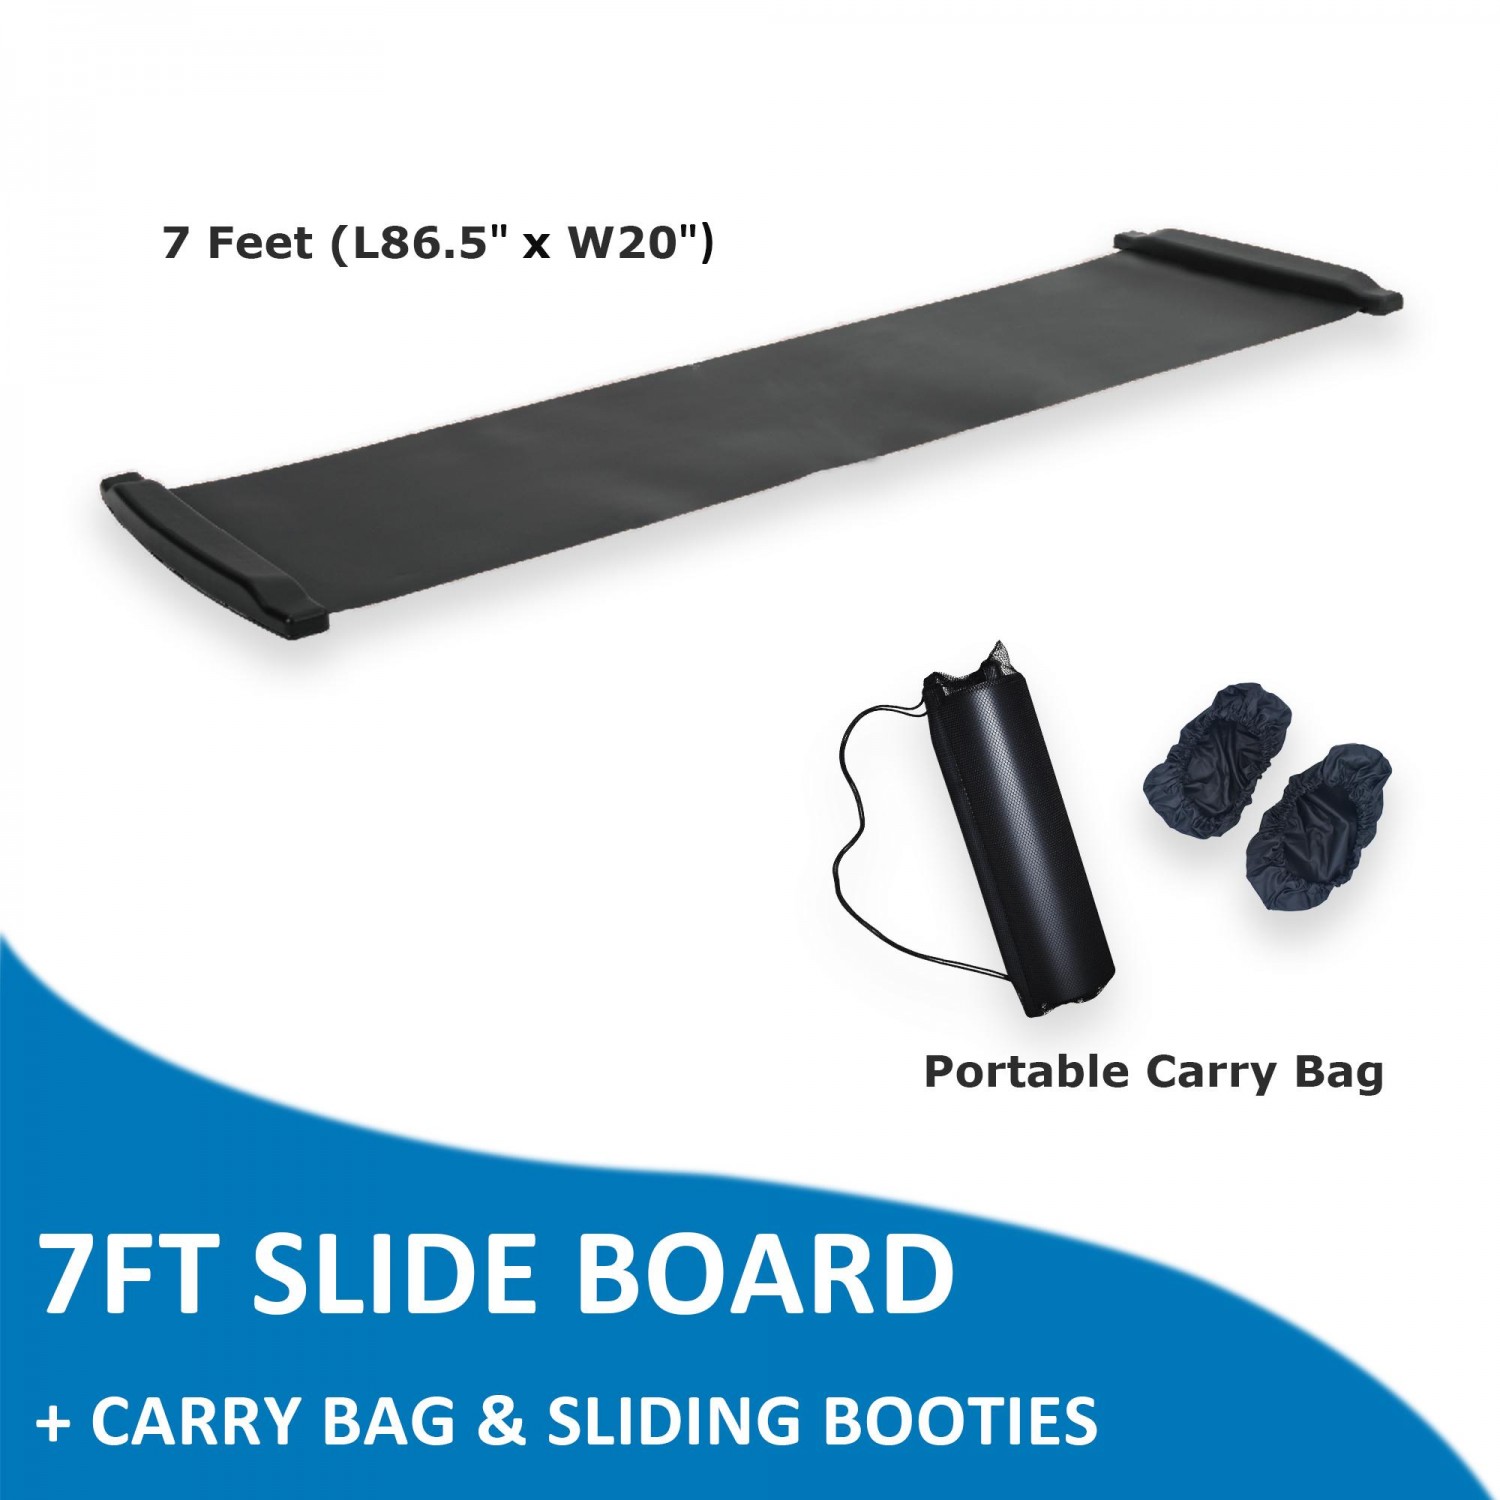 Sliding Board with Shoe Booties & a Carry Bag (L 86.5 Inch x W 20 Inch)